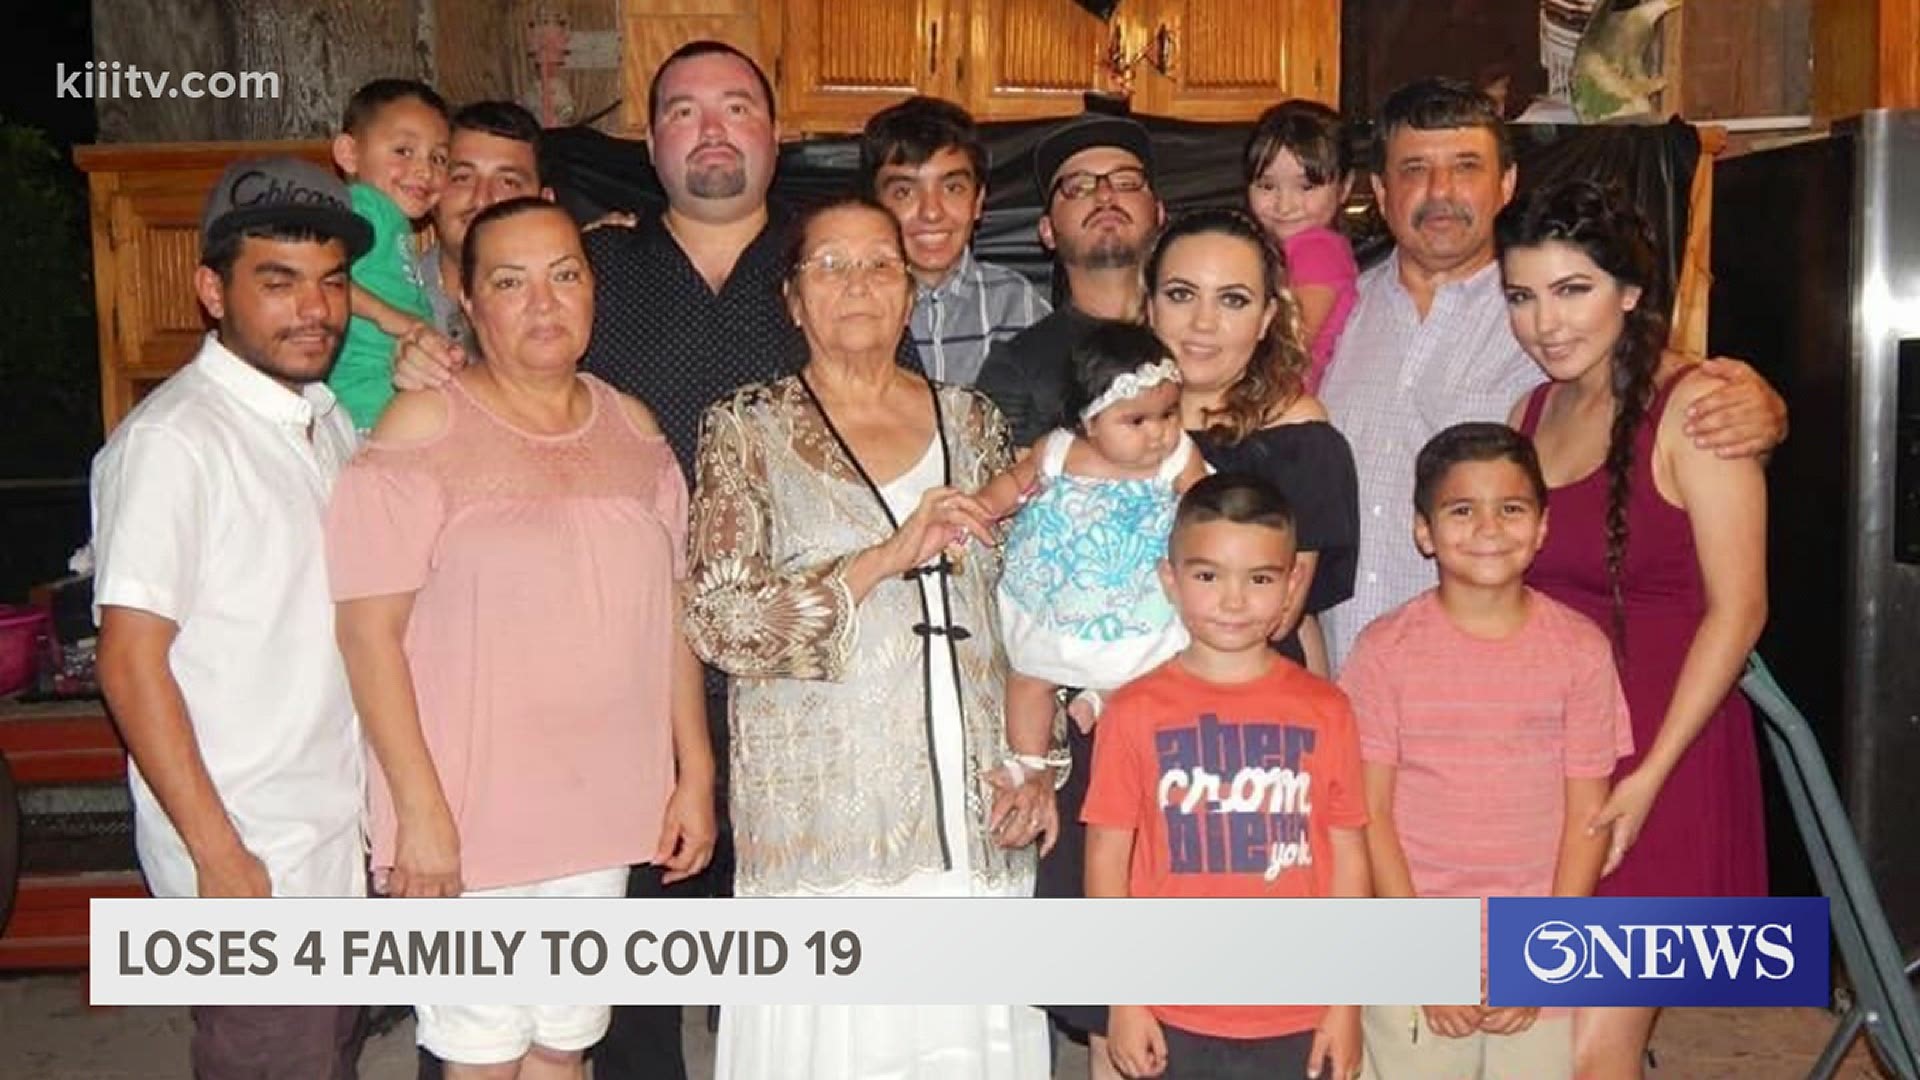 One relative said family members returned from a vacation, and visited their grandmother. She later contracted the virus and was hospitalized.